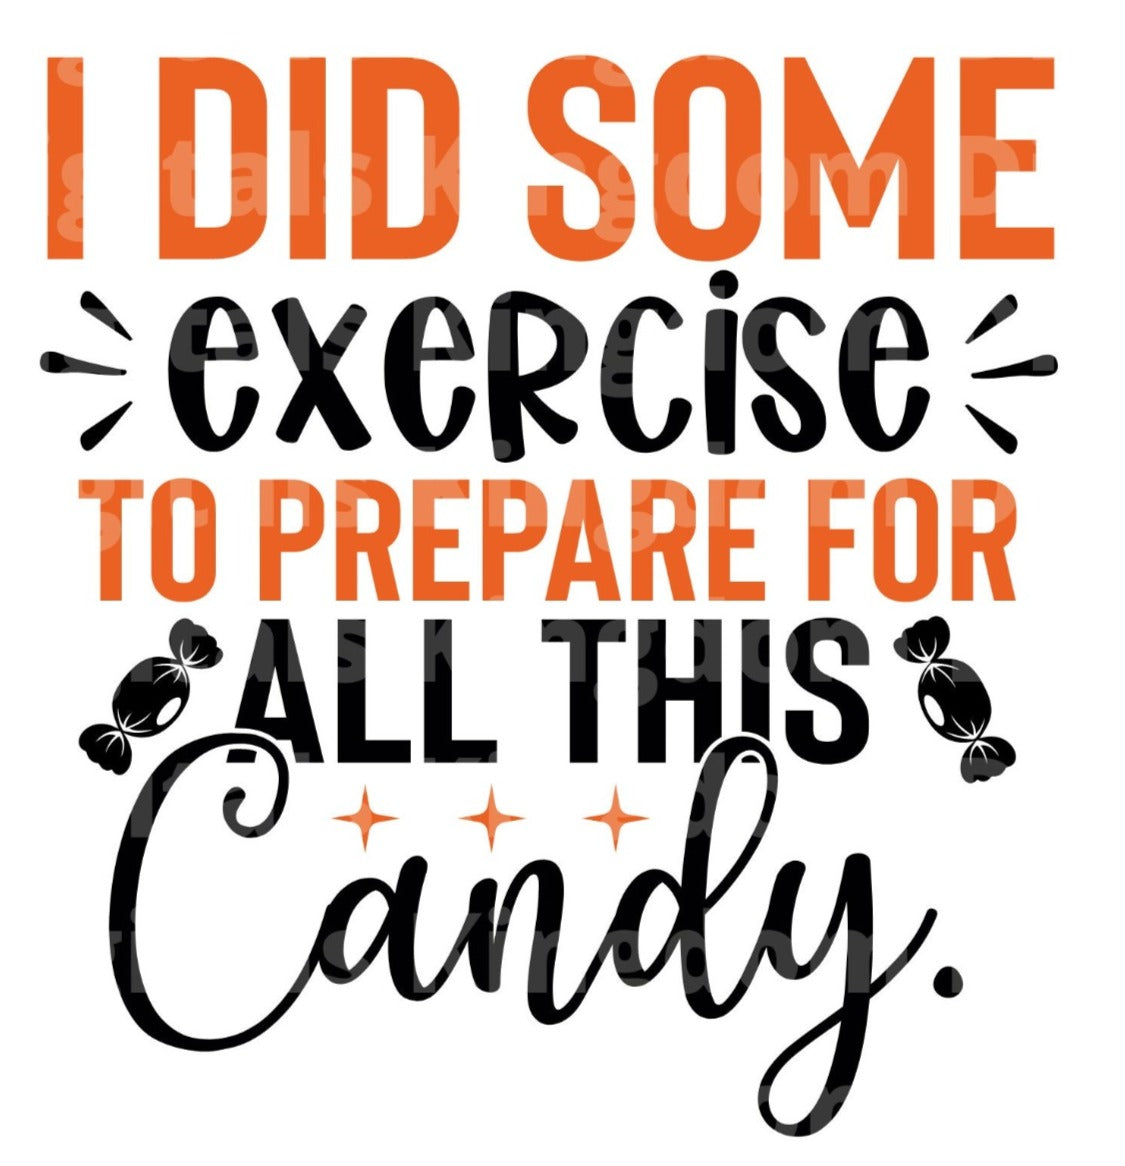 I did some exercise to prepare for all this candy SVG Cut File